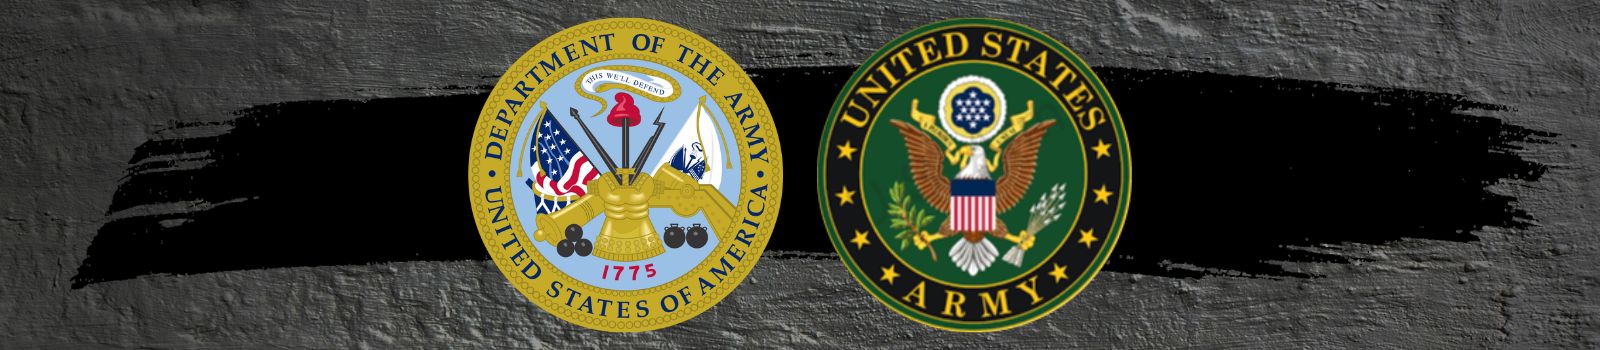 army emblem and army seal